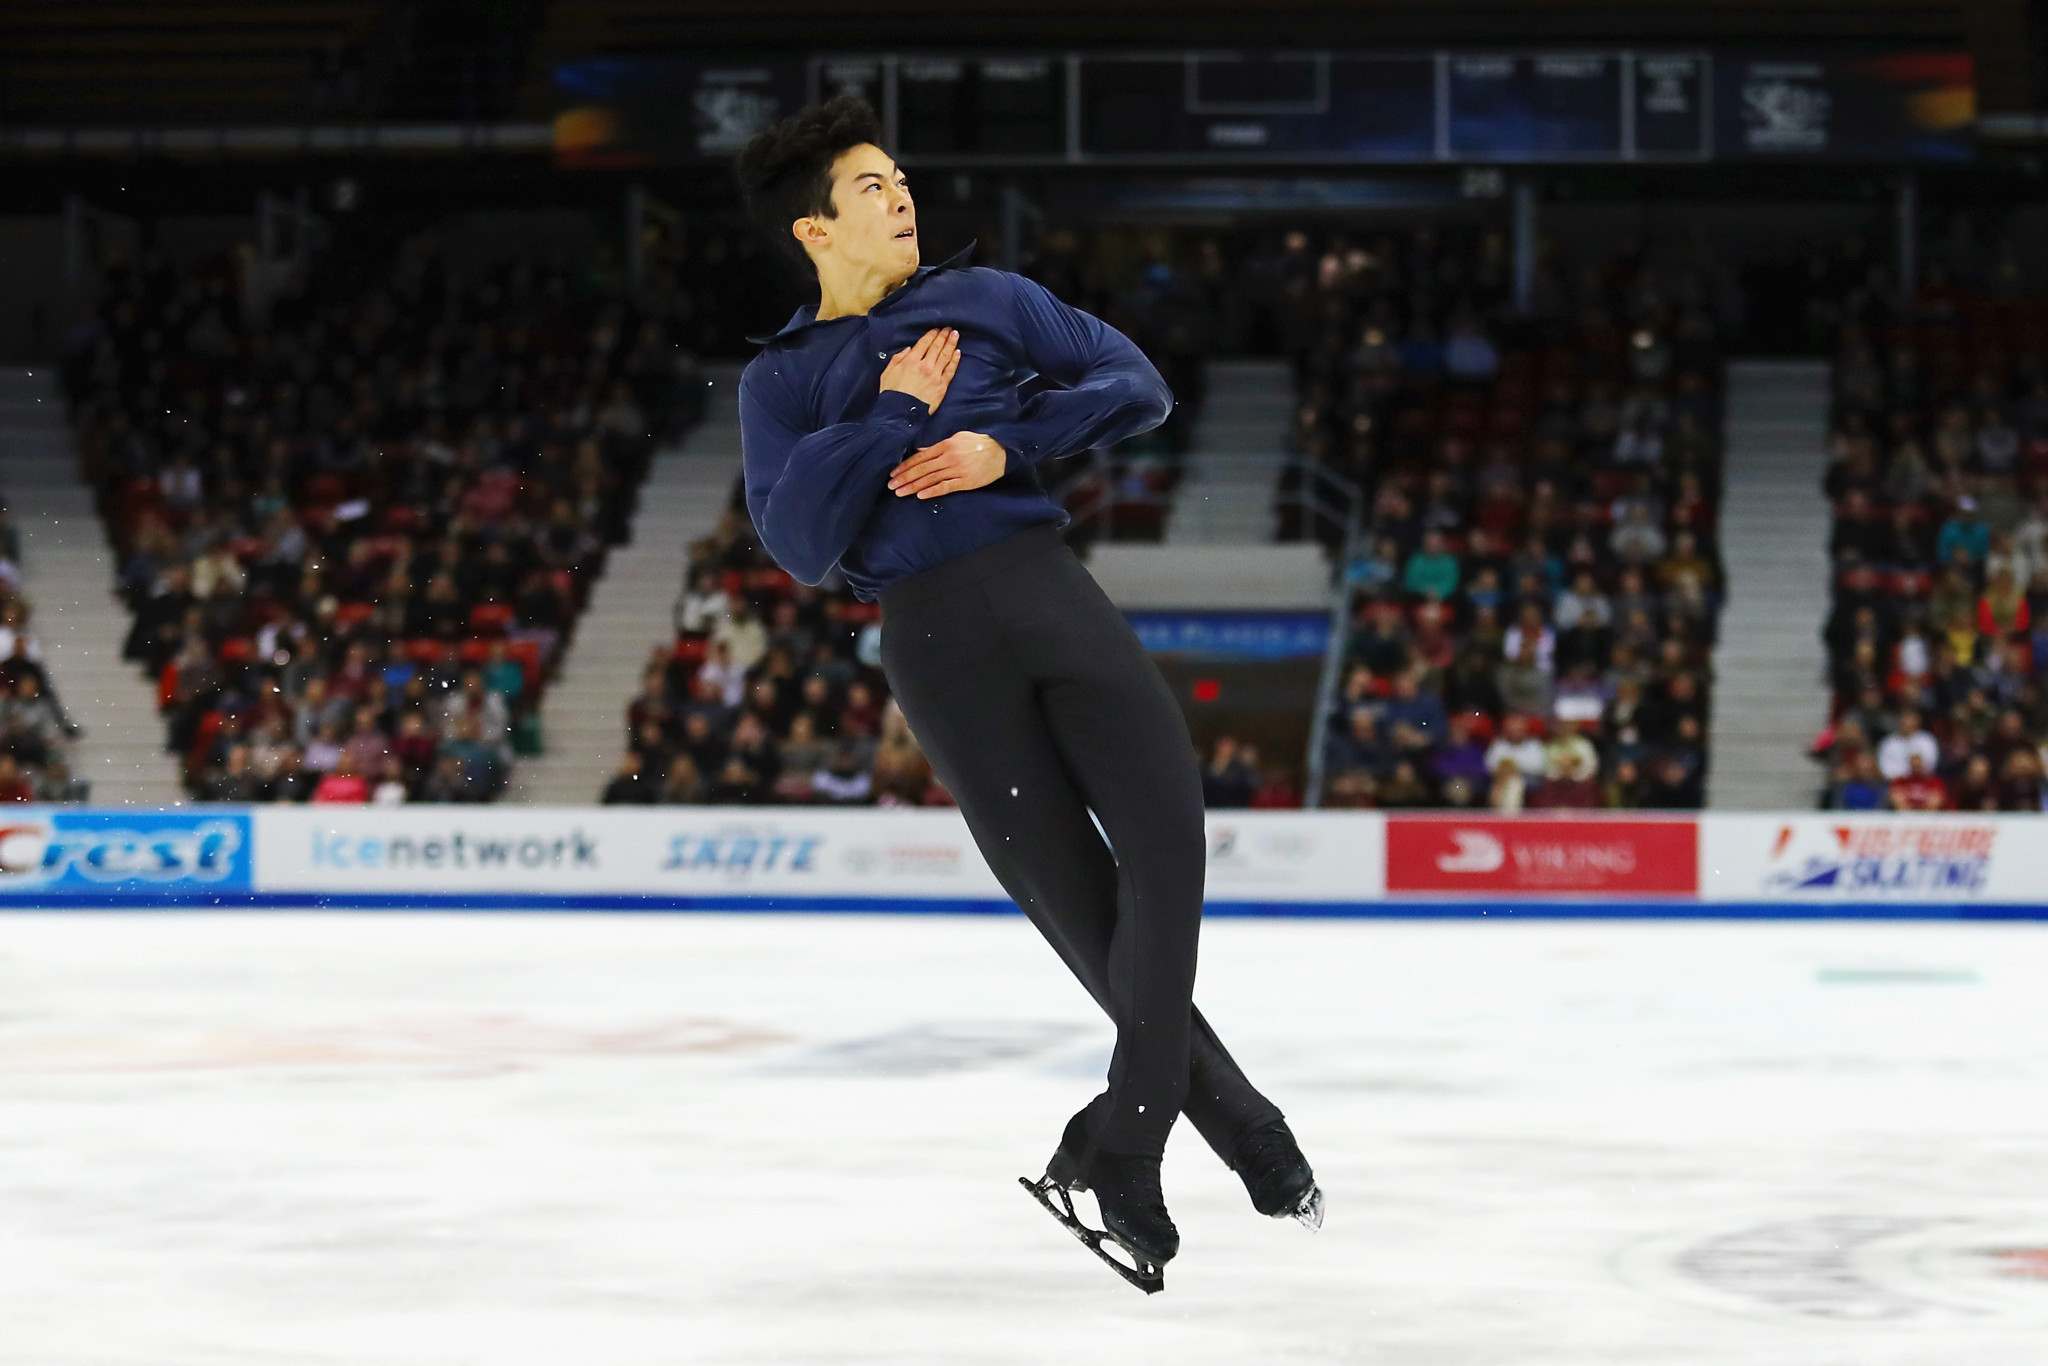 Nathan Chen of the United States tops the standings going into this week's ISU Grand Prix Final in Nagoya ©Getty Images